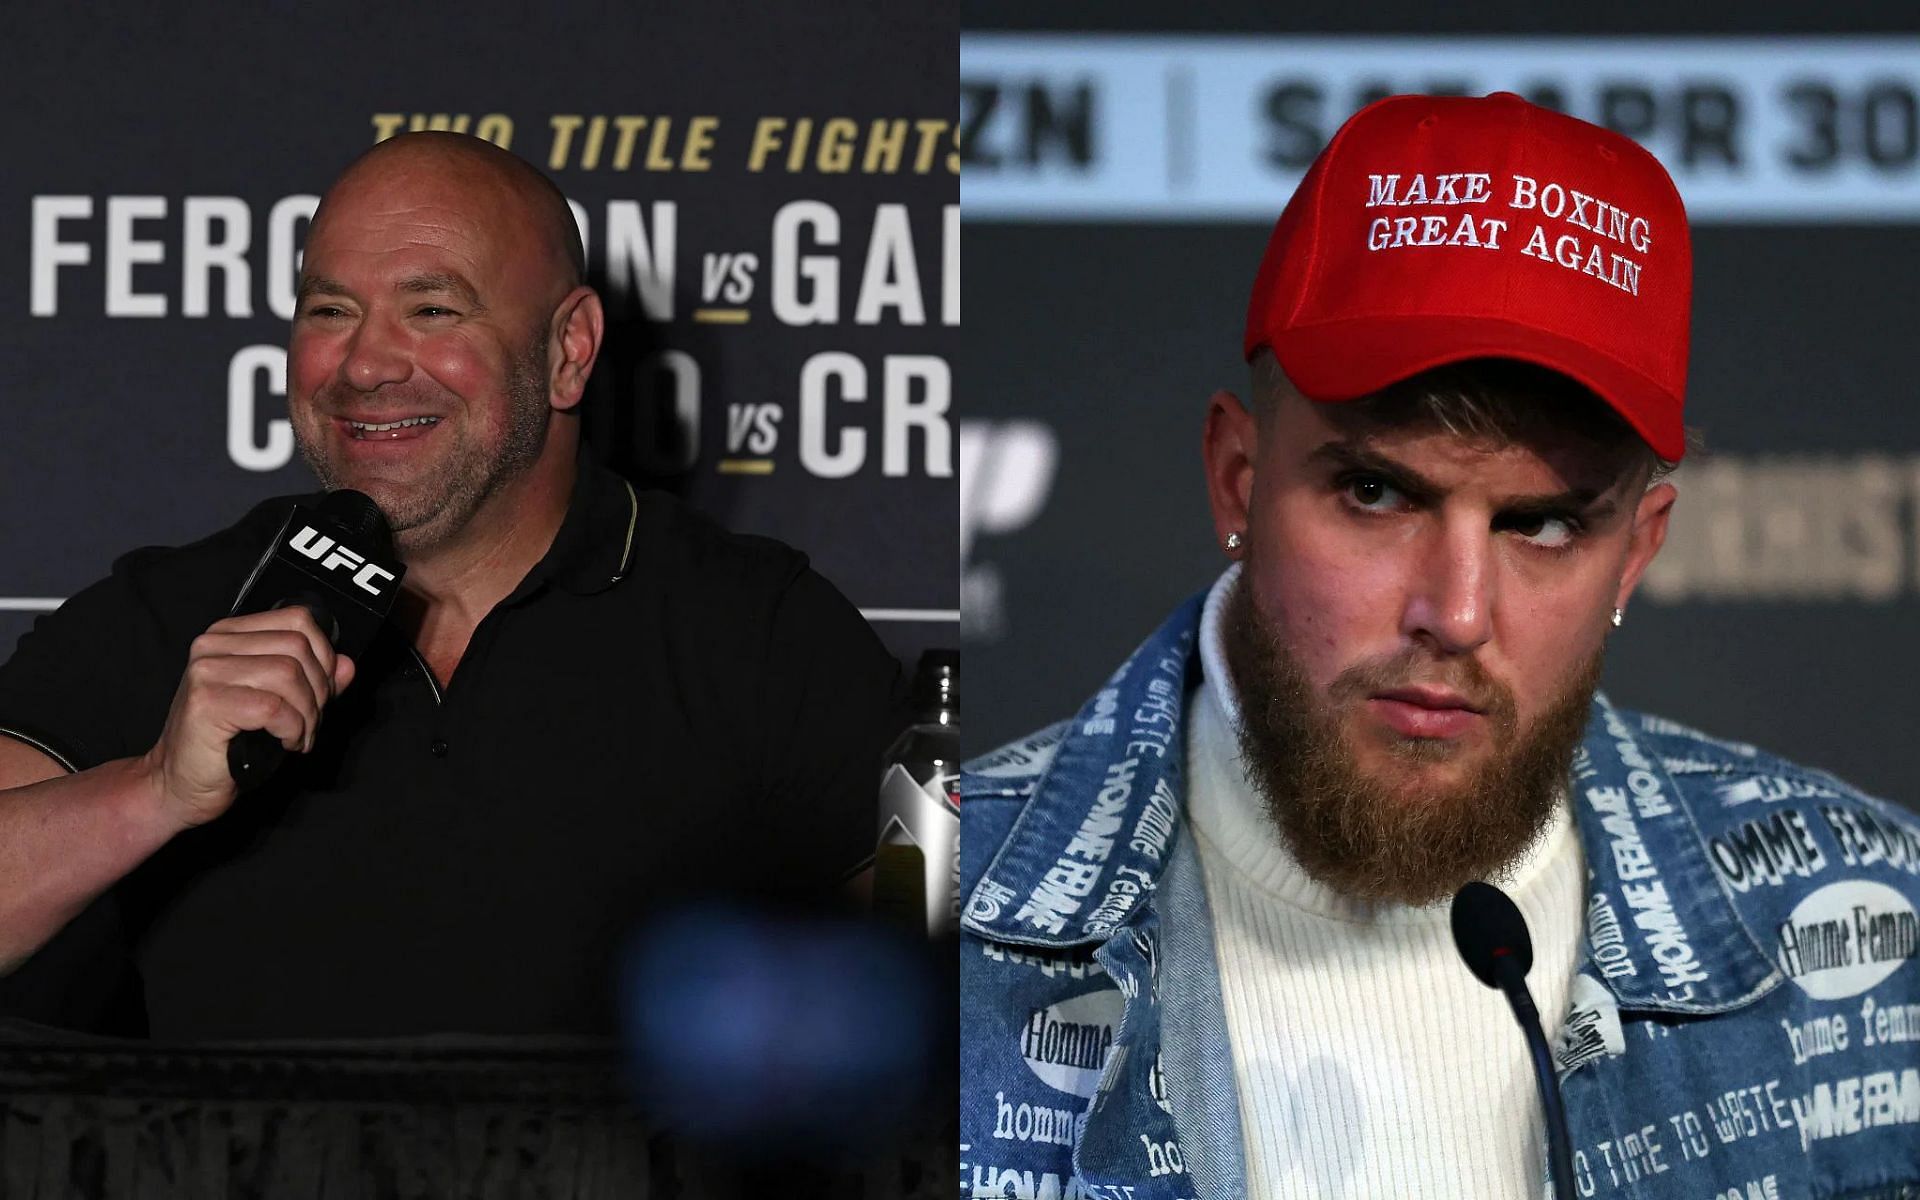 Dana White (Left) and Jake Paul (Right) (Images courtesy of Getty)